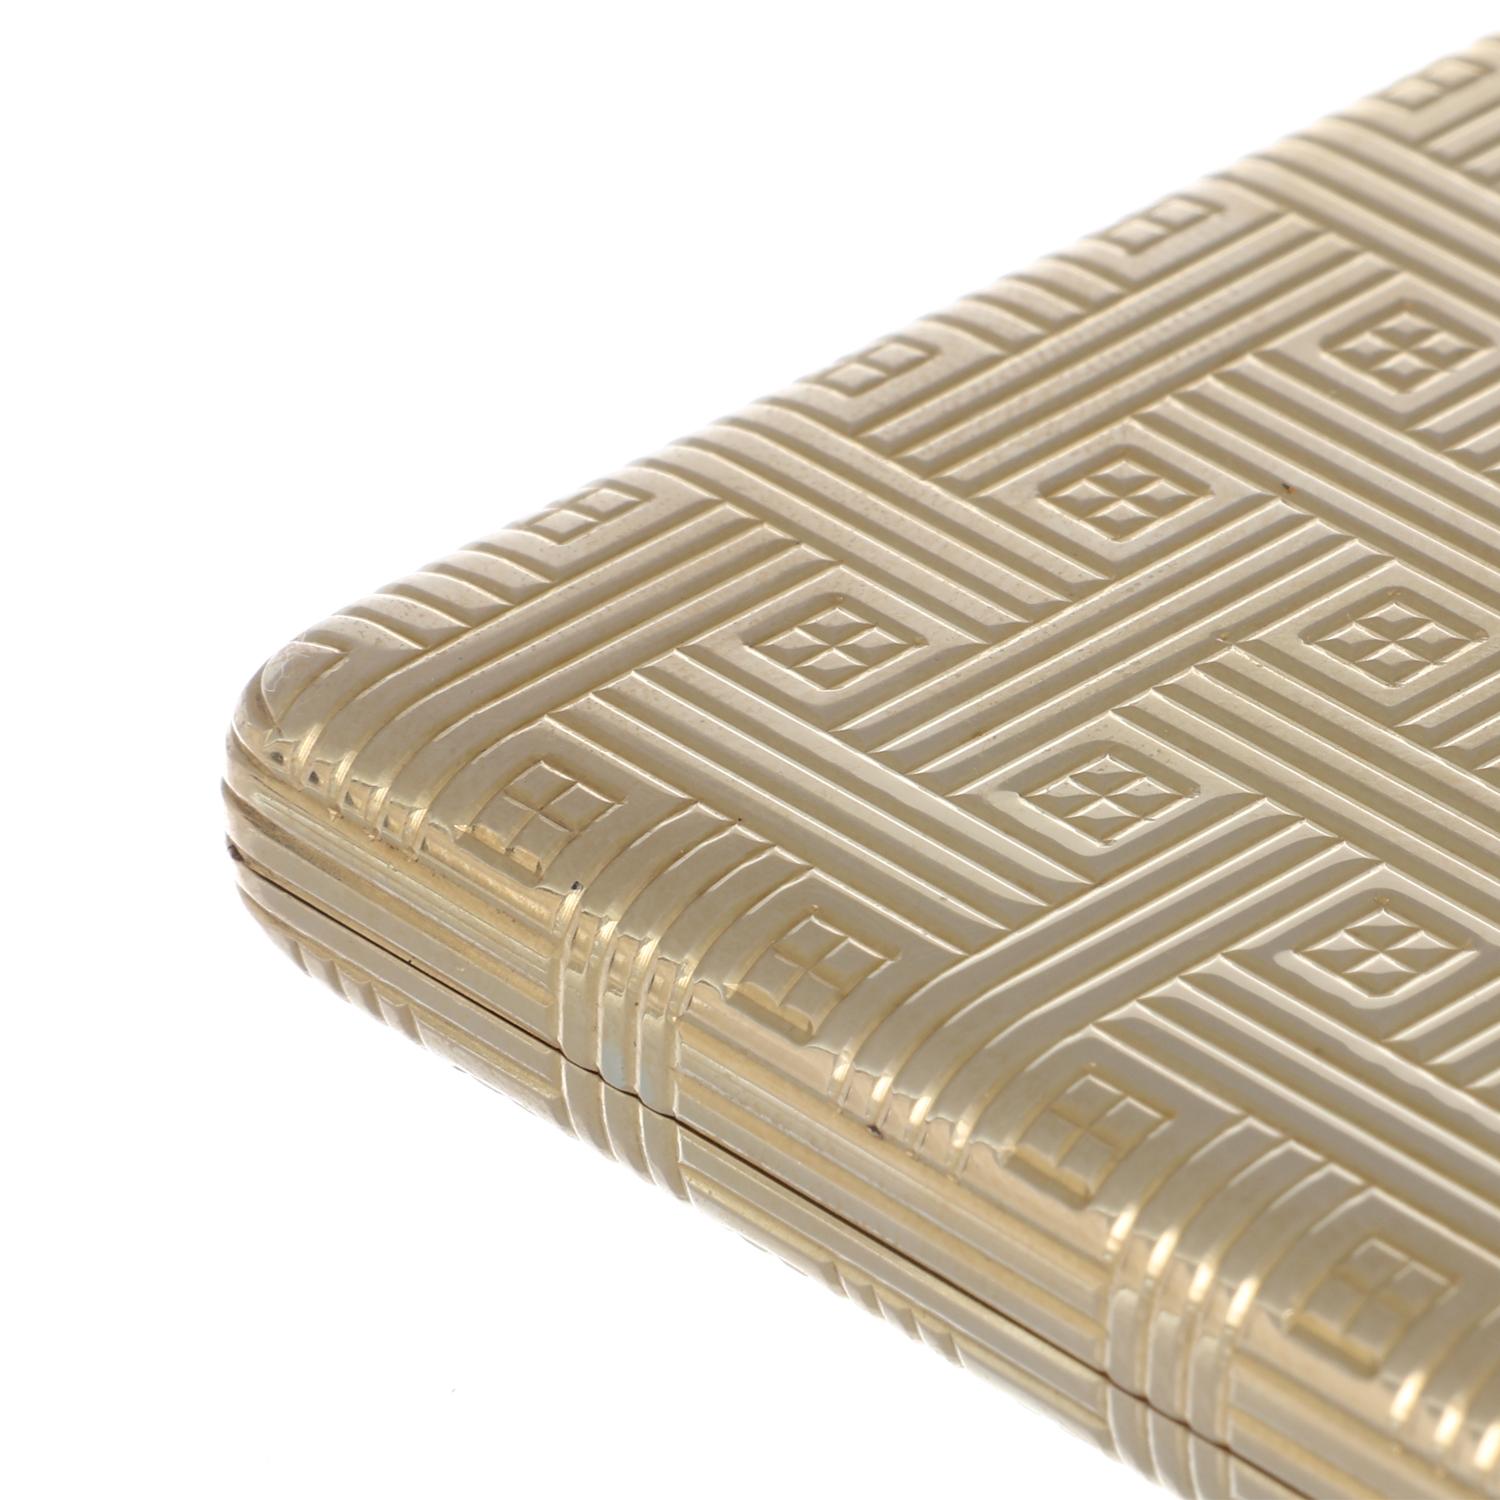 18Kt Gold Rare Compact Powder Box - Made in Italy 1970 circa - Geometric Pattern For Sale 6